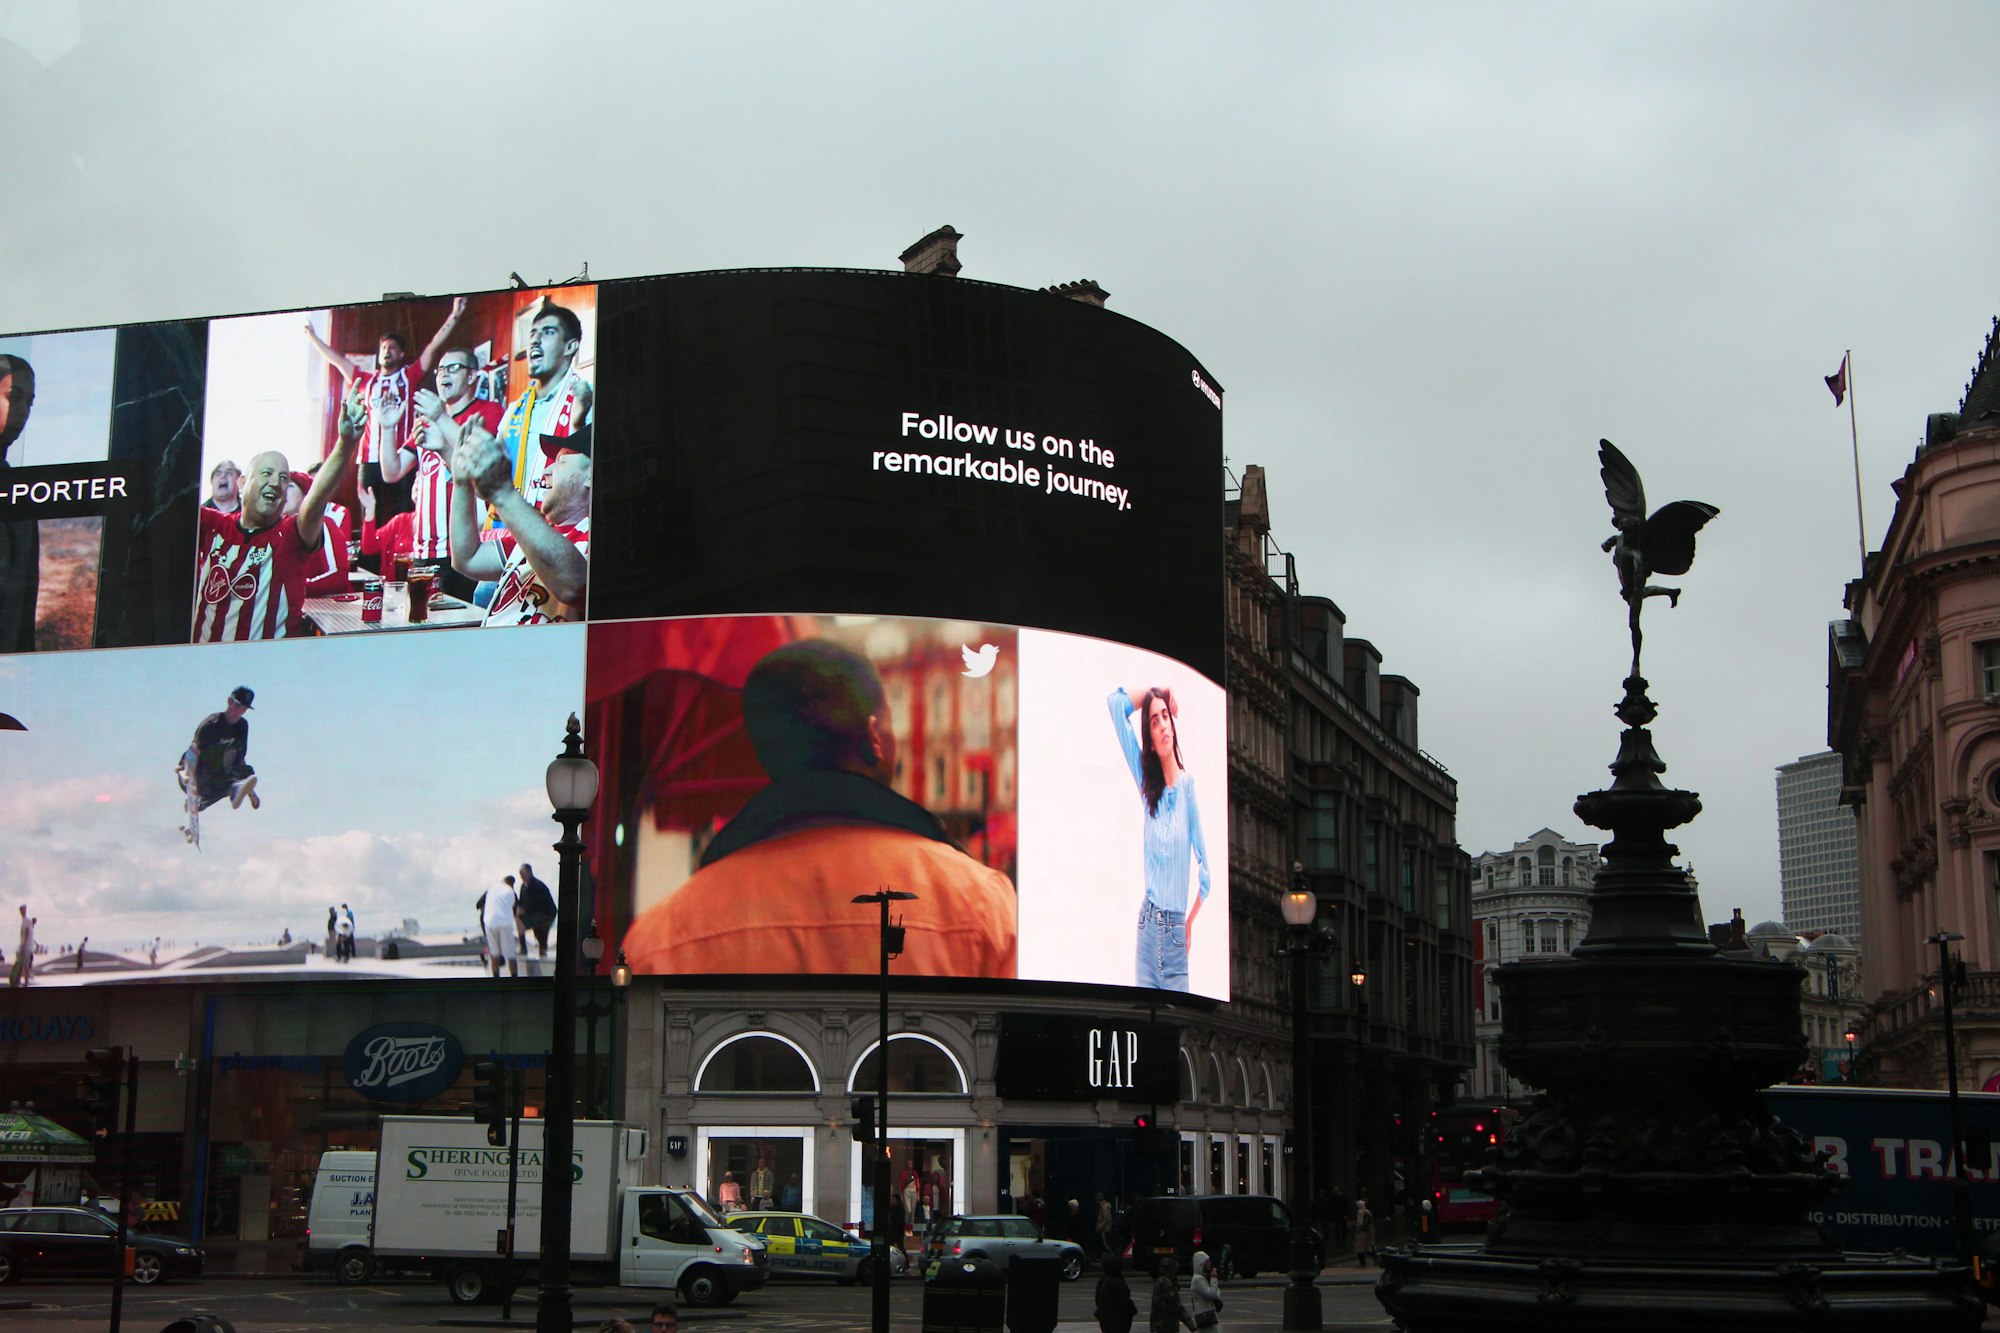 video advertisements on LED billboard in city